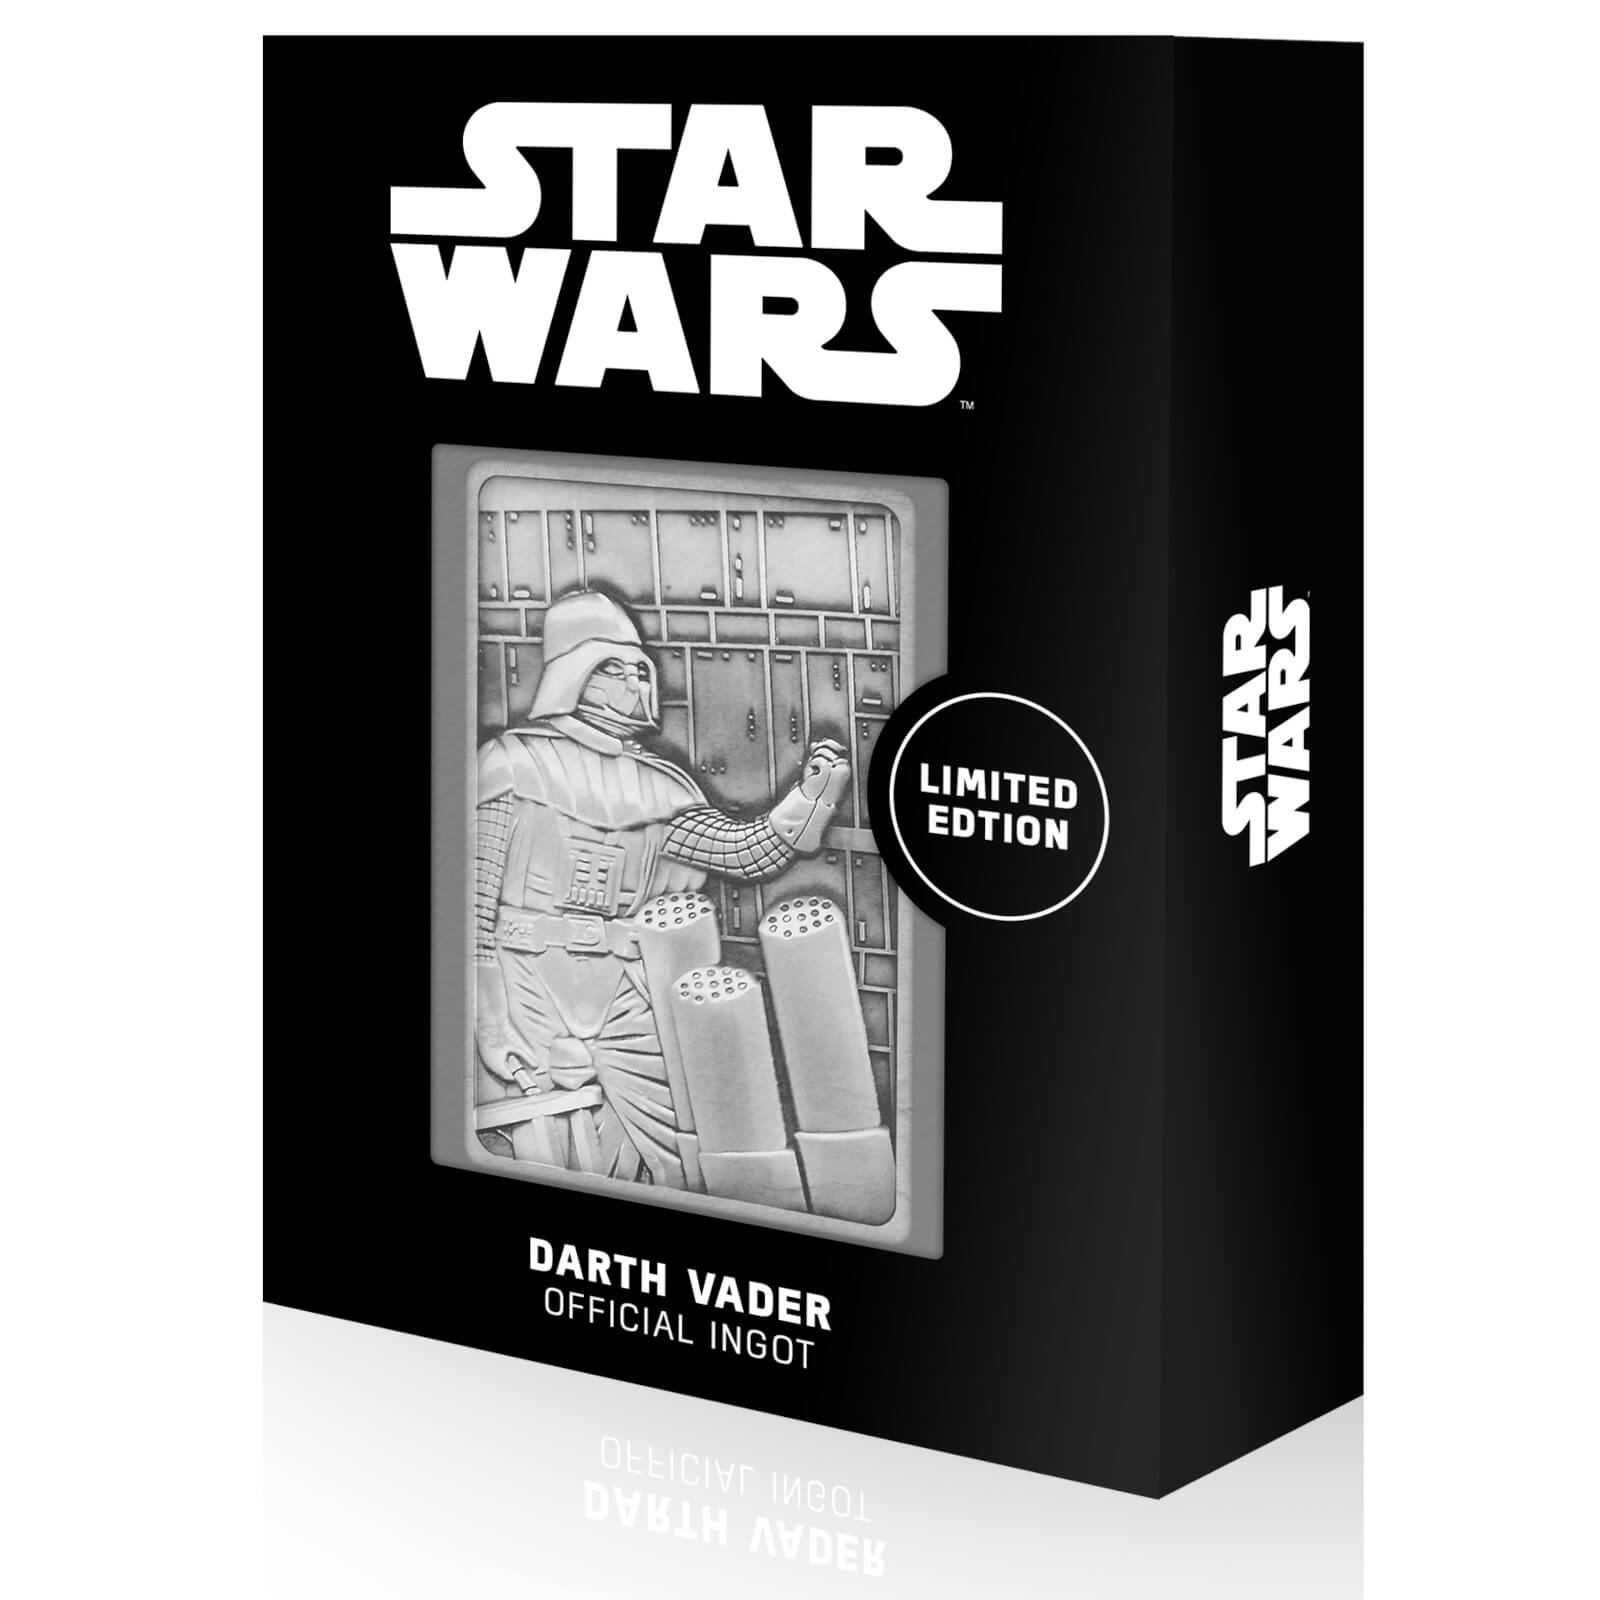 Star Wars Iconic Scene Collection Limited Edition Ingot - Darth Vader